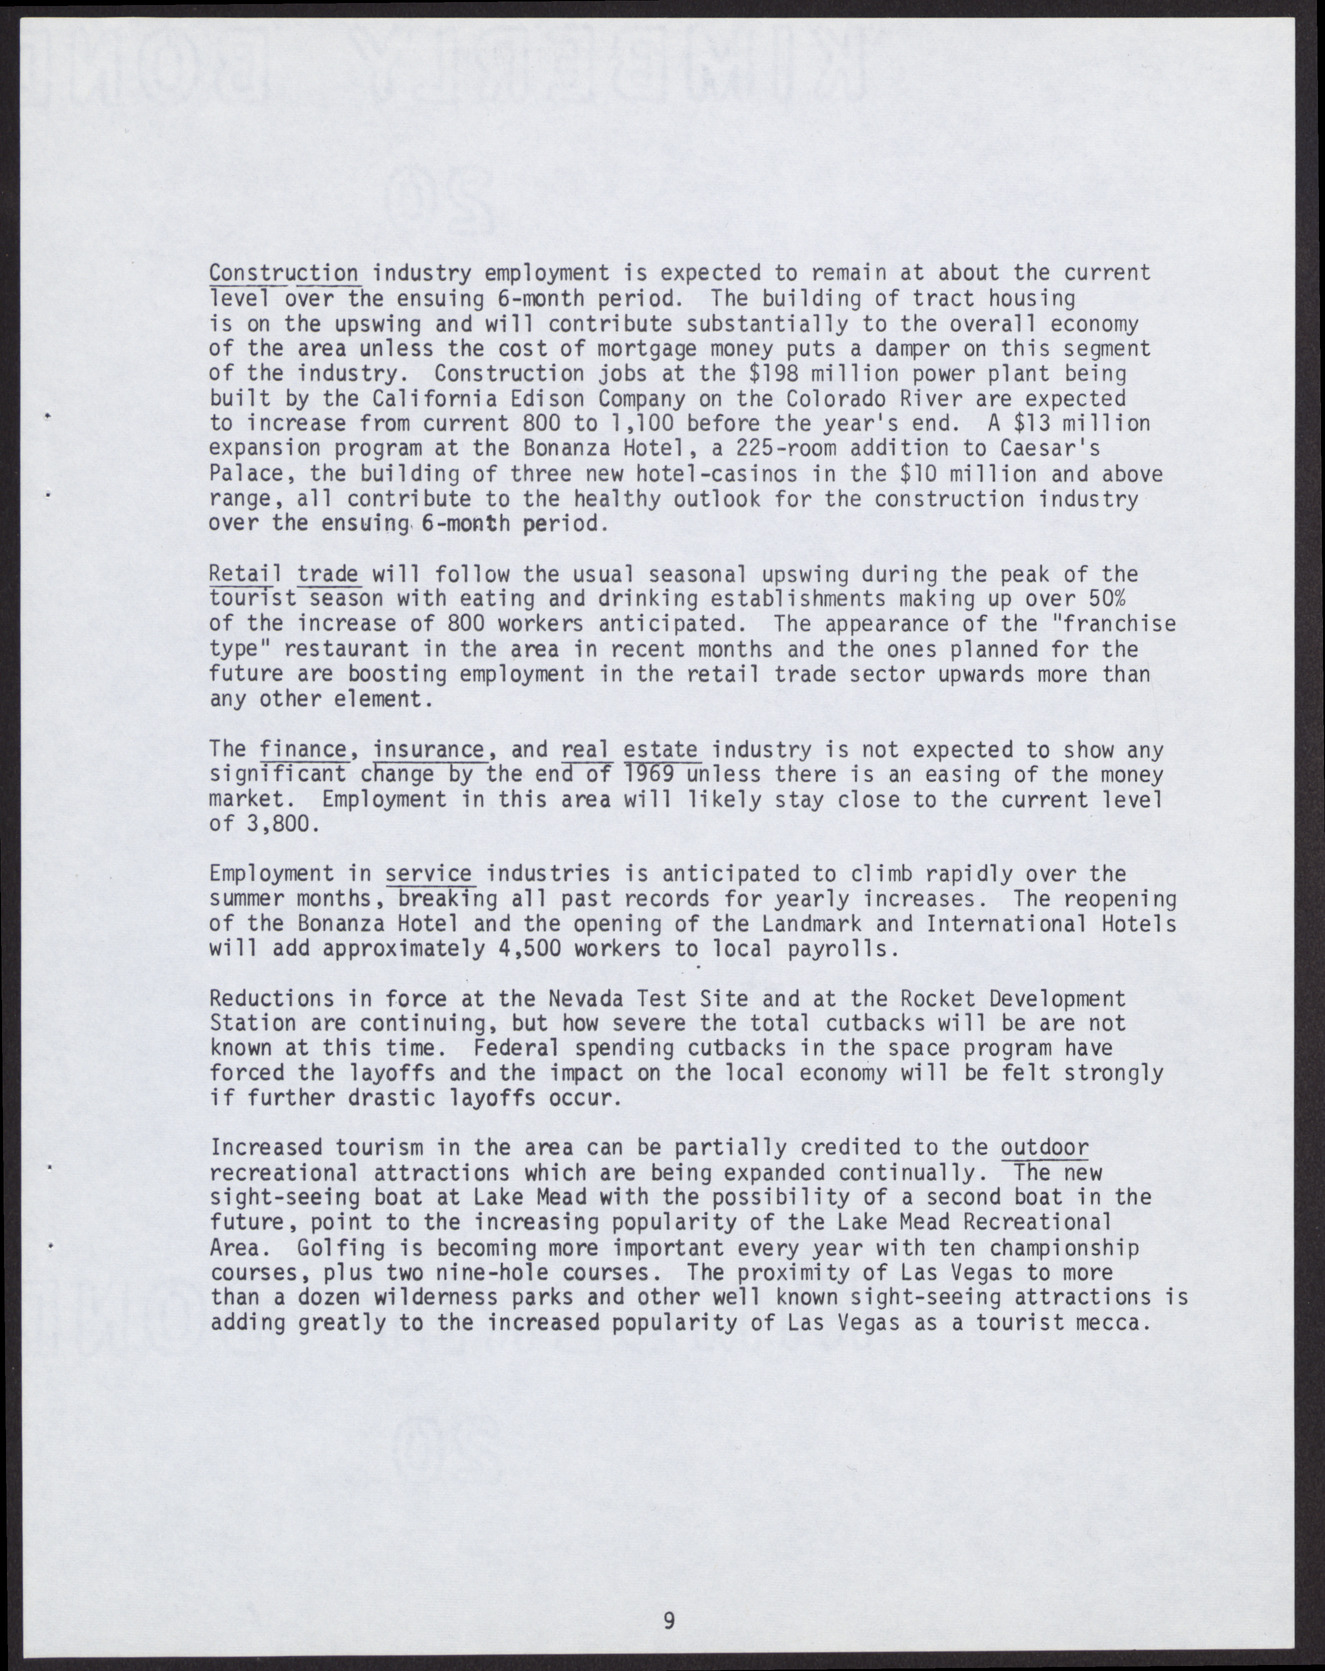 Semi-annual Area Manpower Review (16 pages), Fall 1969, page 12